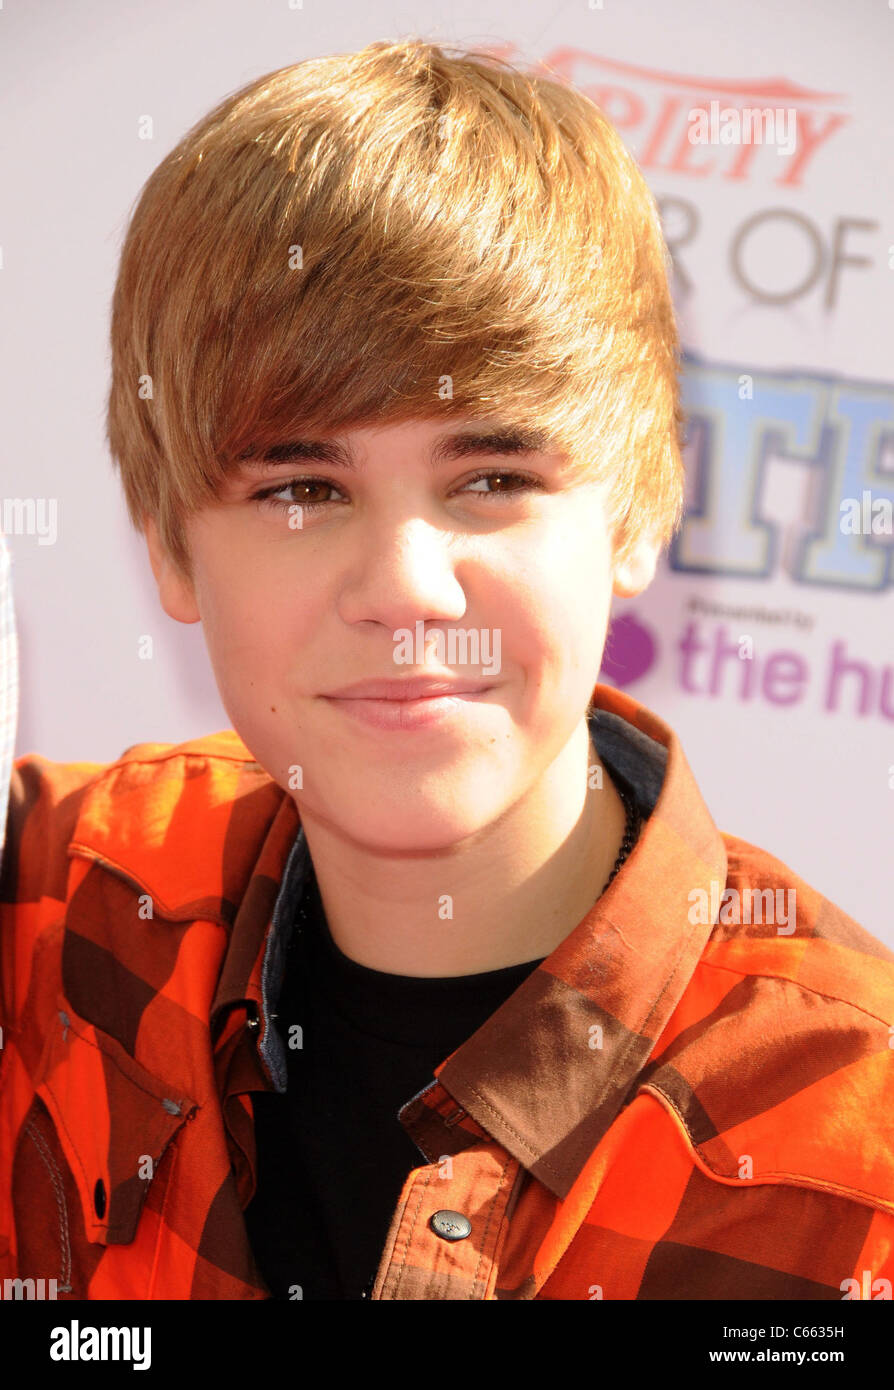 Justin Bieber at arrivals for Variety's 4th Annual Power of Youth Event, Paramount Studios, Los Angeles, CA October 24, 2010. Photo By: Dee Cercone/Everett Collection Stock Photo